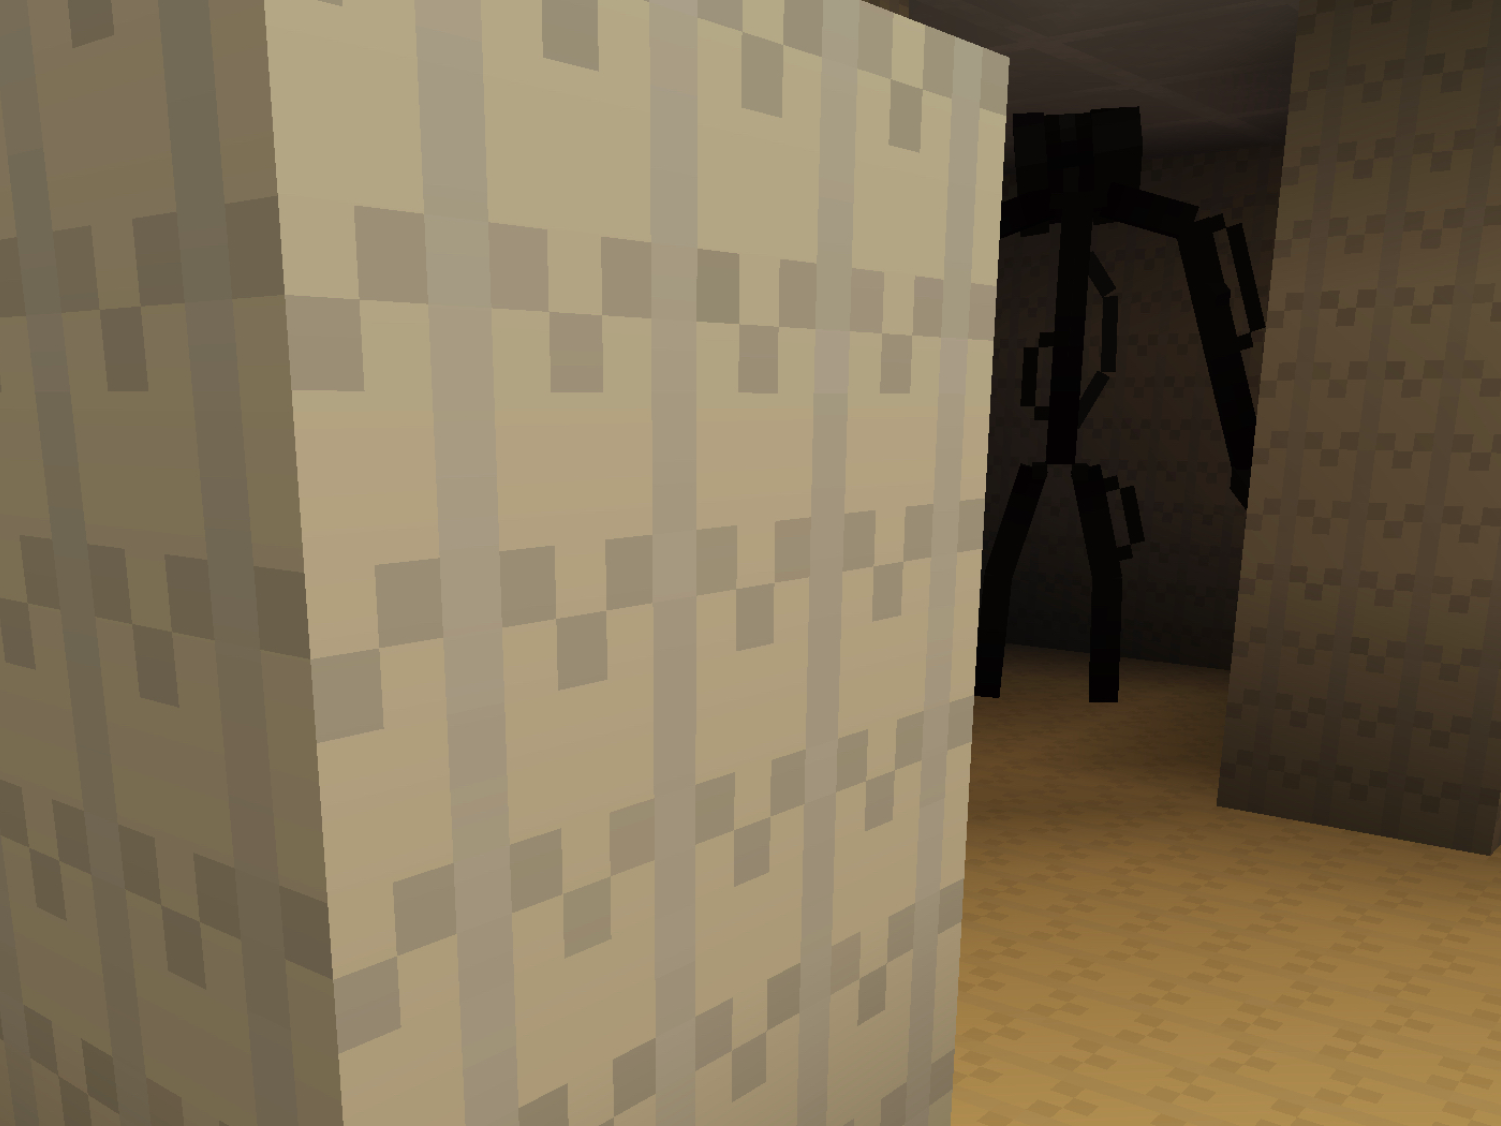 The Backrooms: Bacteria in Minecraft Marketplace